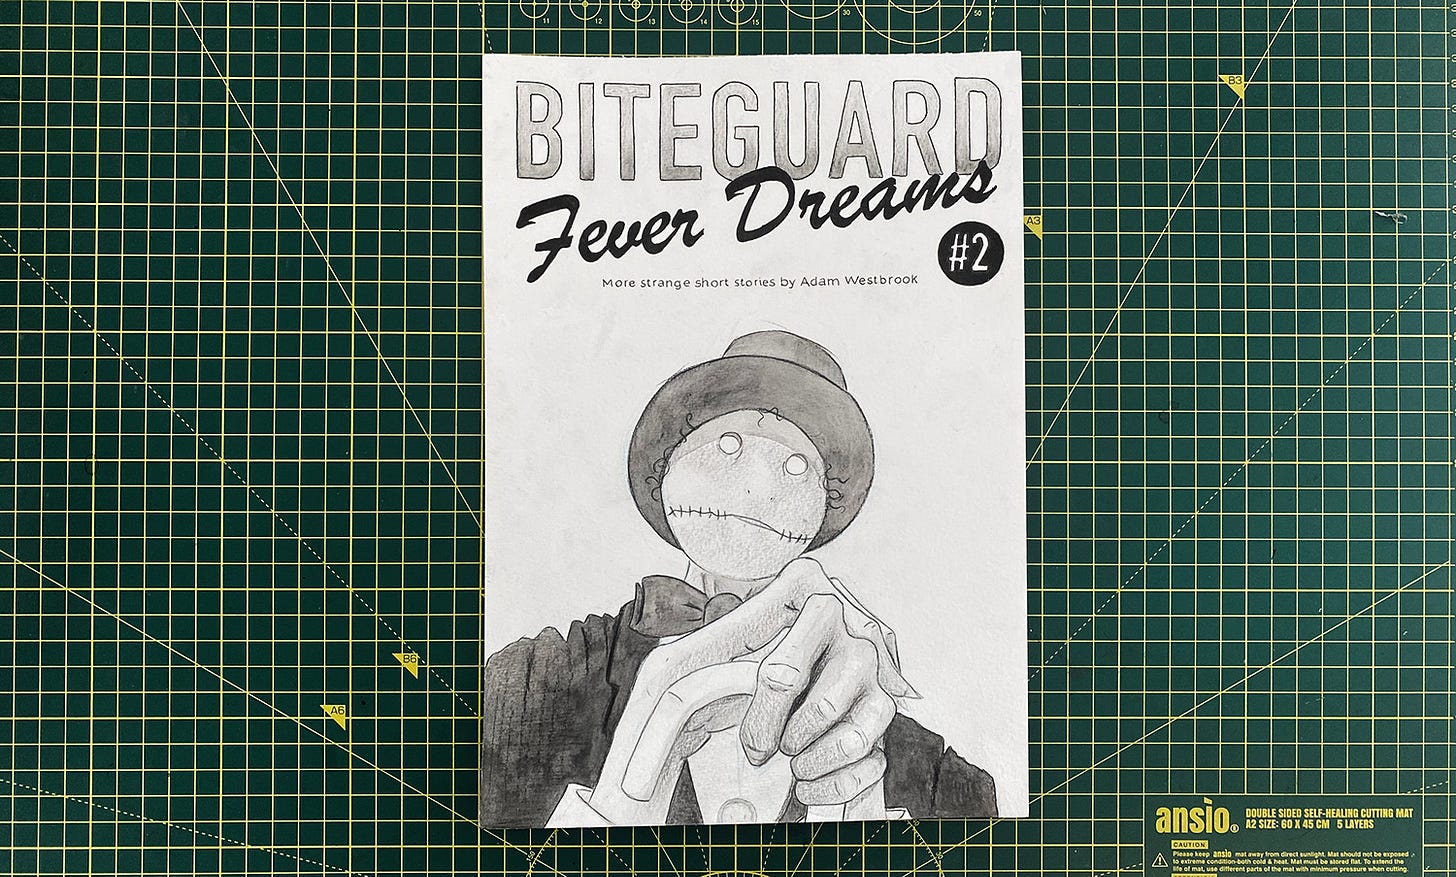 A photograph of the front cover of Biteguard Fever Dreams, by Adam Westbrook